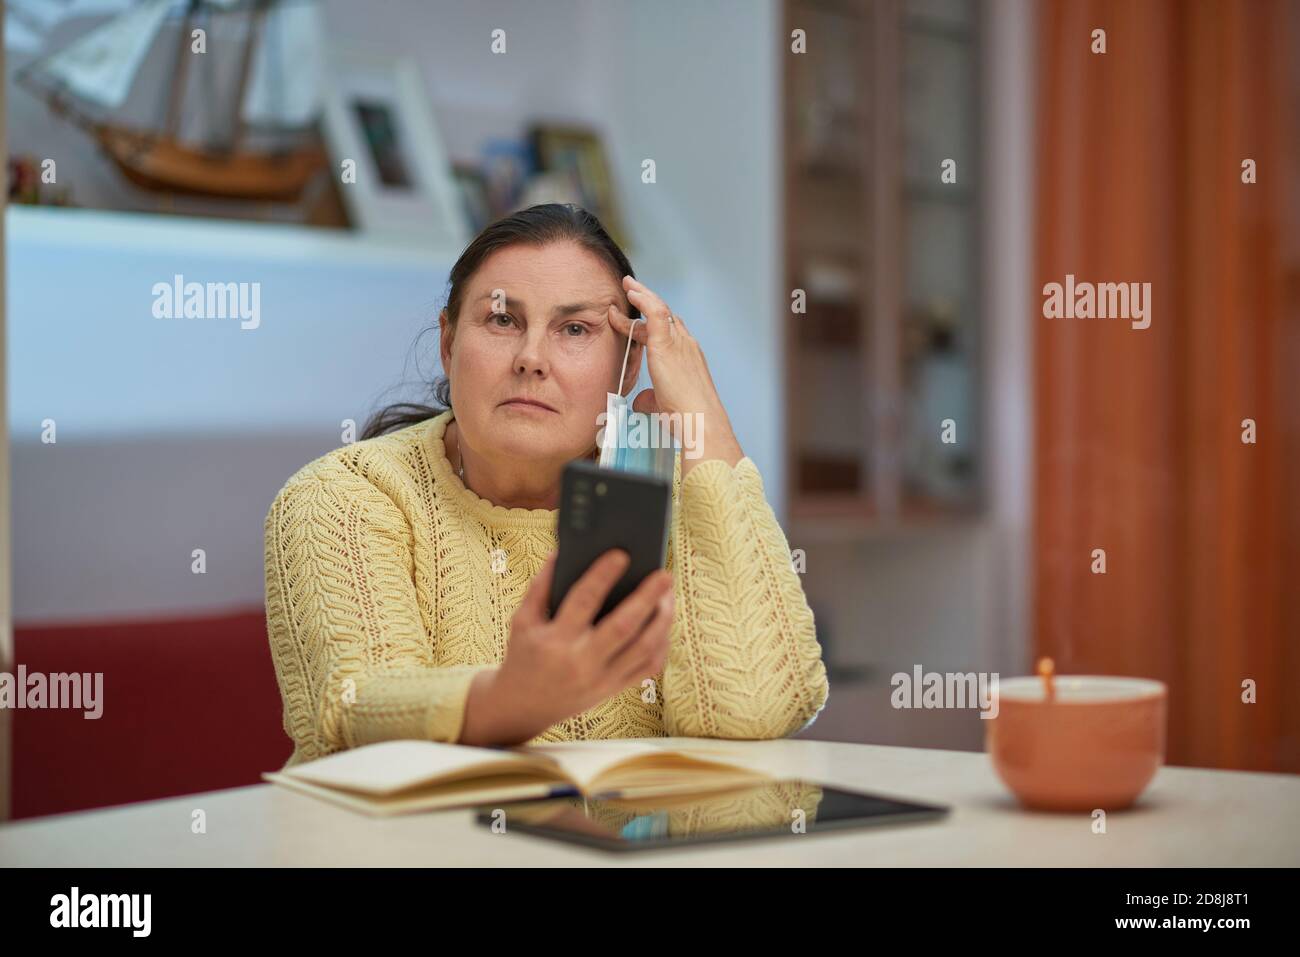 Sad senior woman in yellow sweater with smartphone and mask Stock Photo